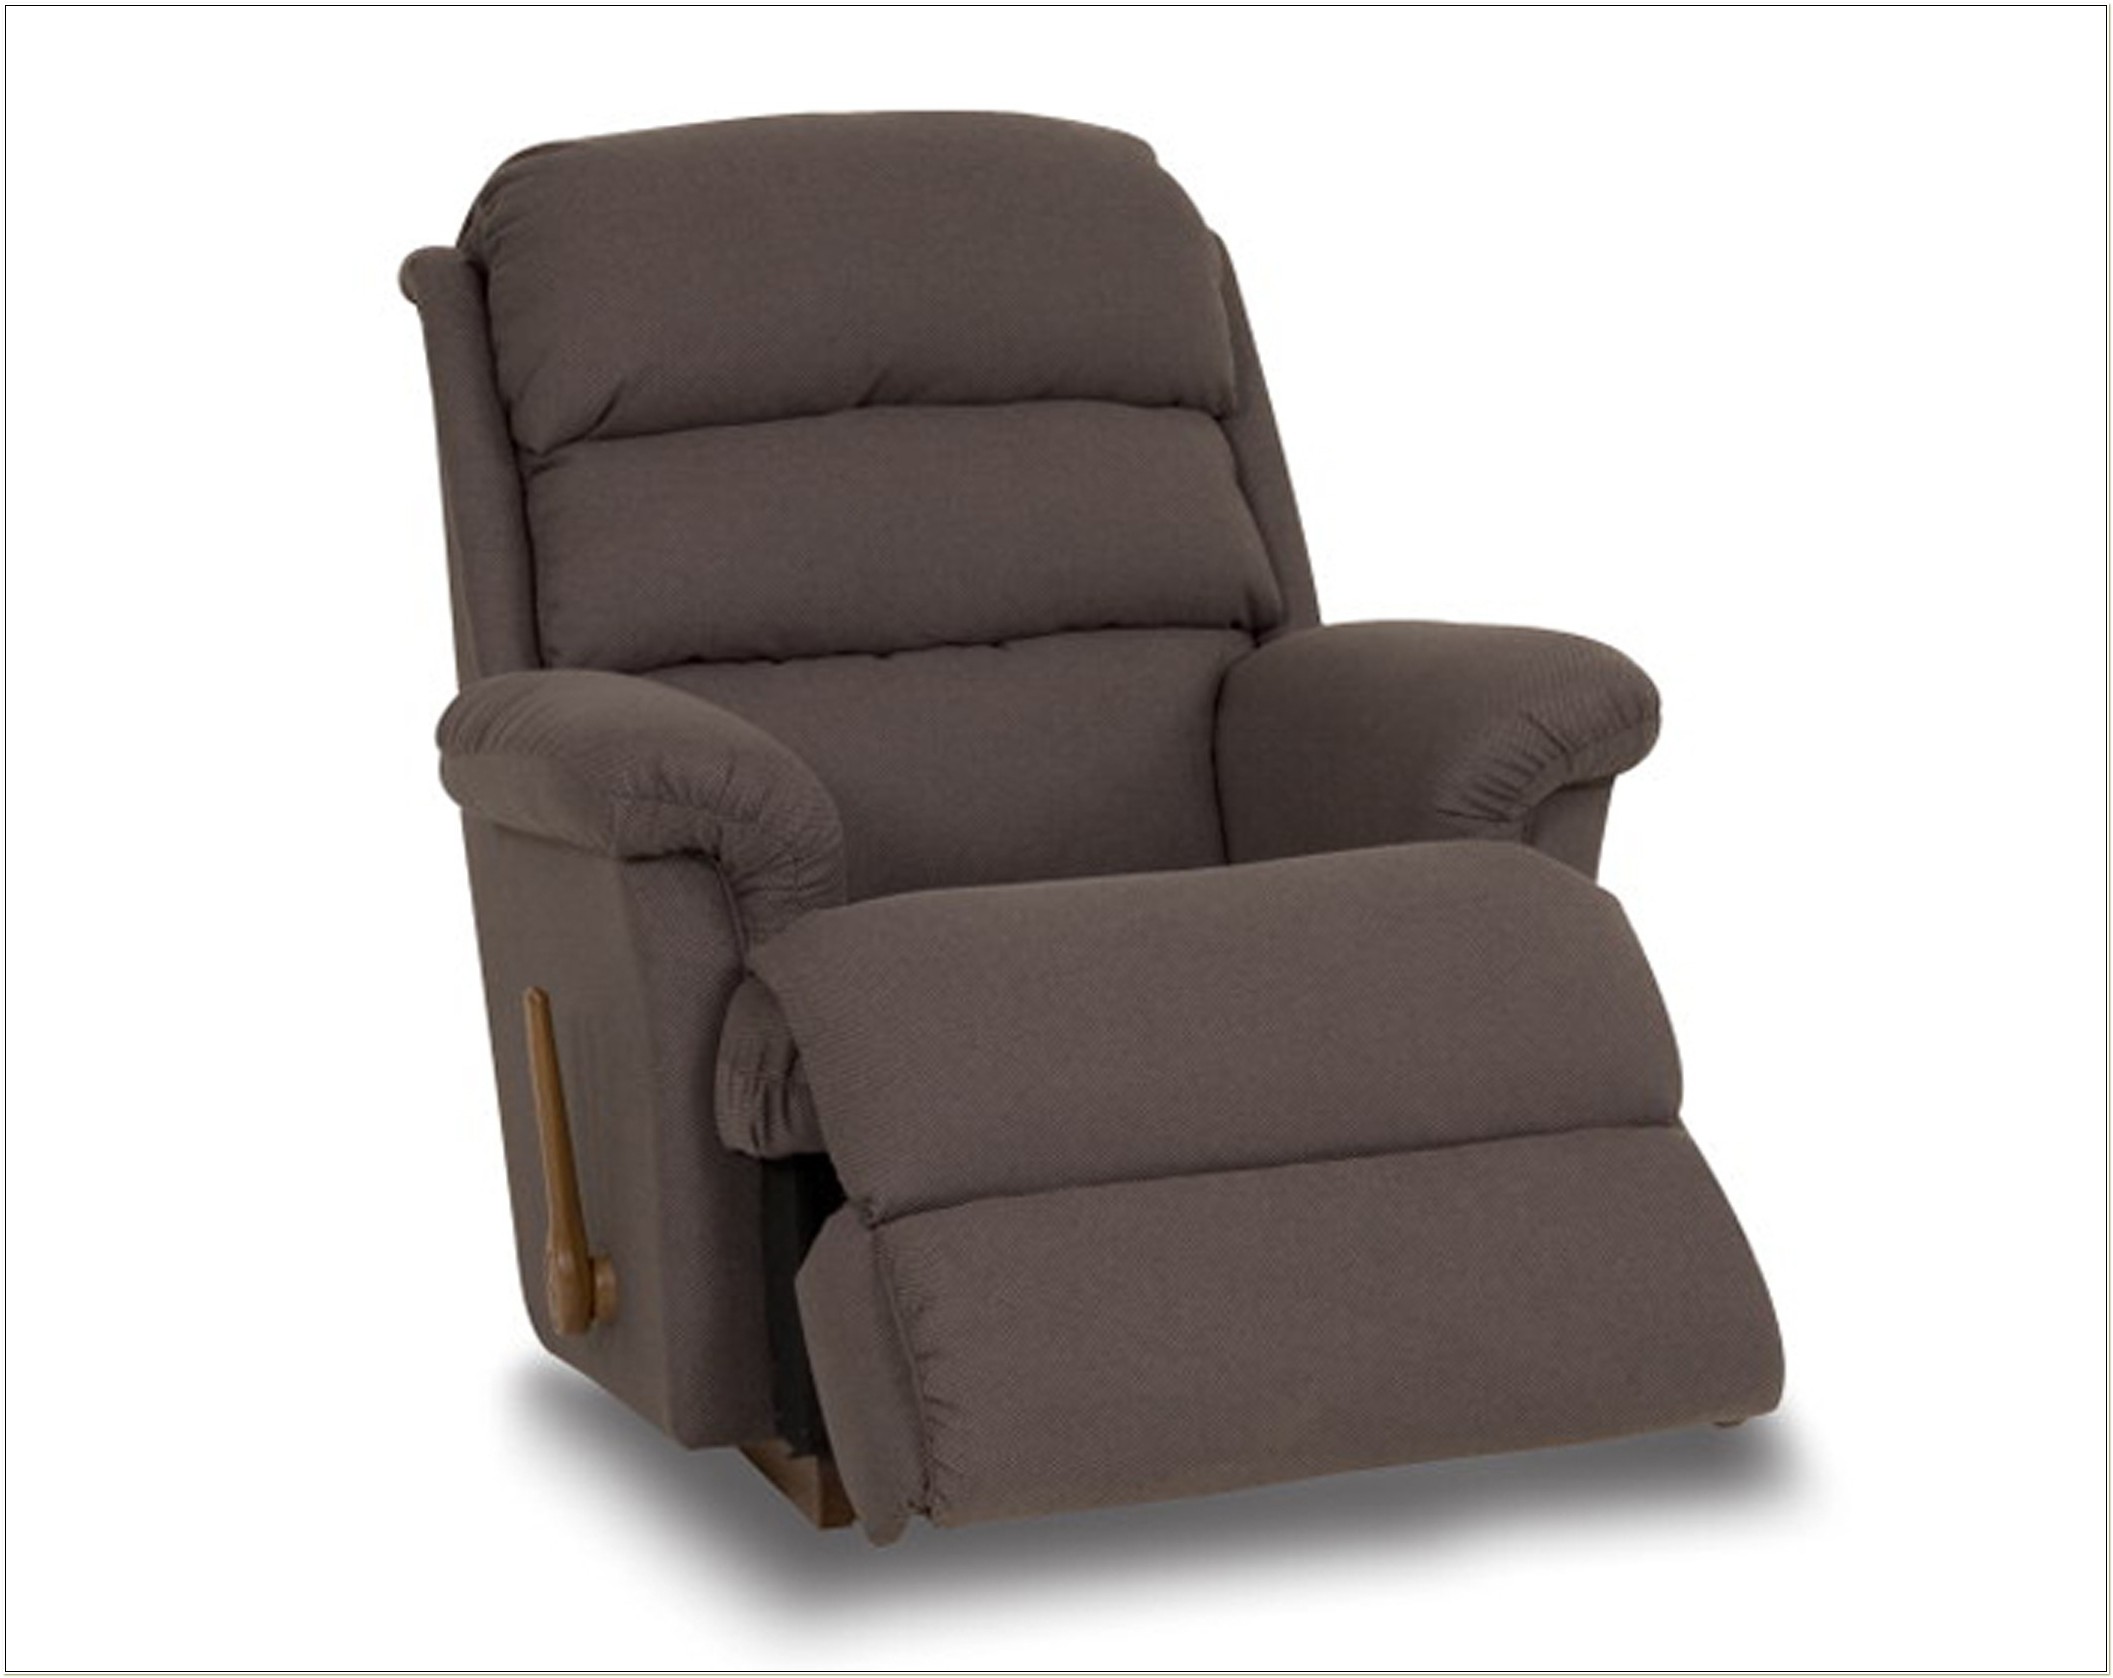 Swivel Rocker Recliner Chair Covers - Chairs : Home Decorating Ideas